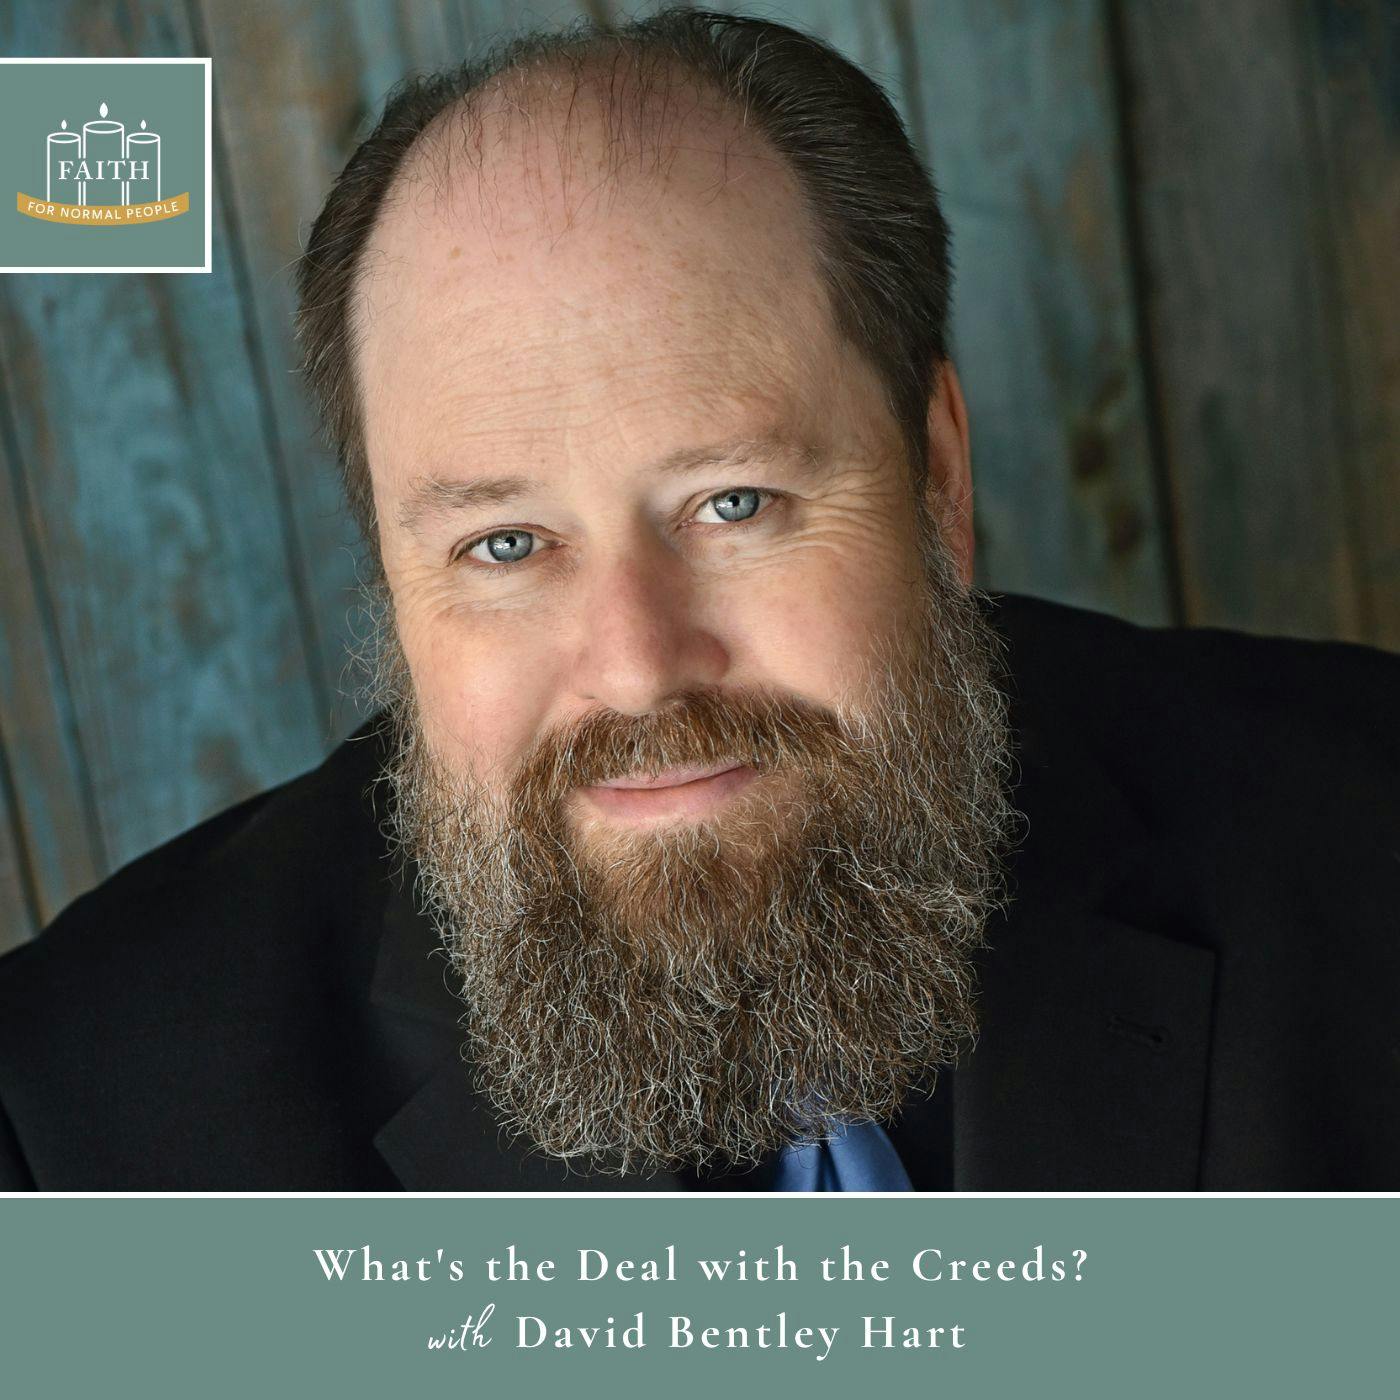 [Faith] Episode 18: David Bentley Hart - What’s the Deal with the Creeds?